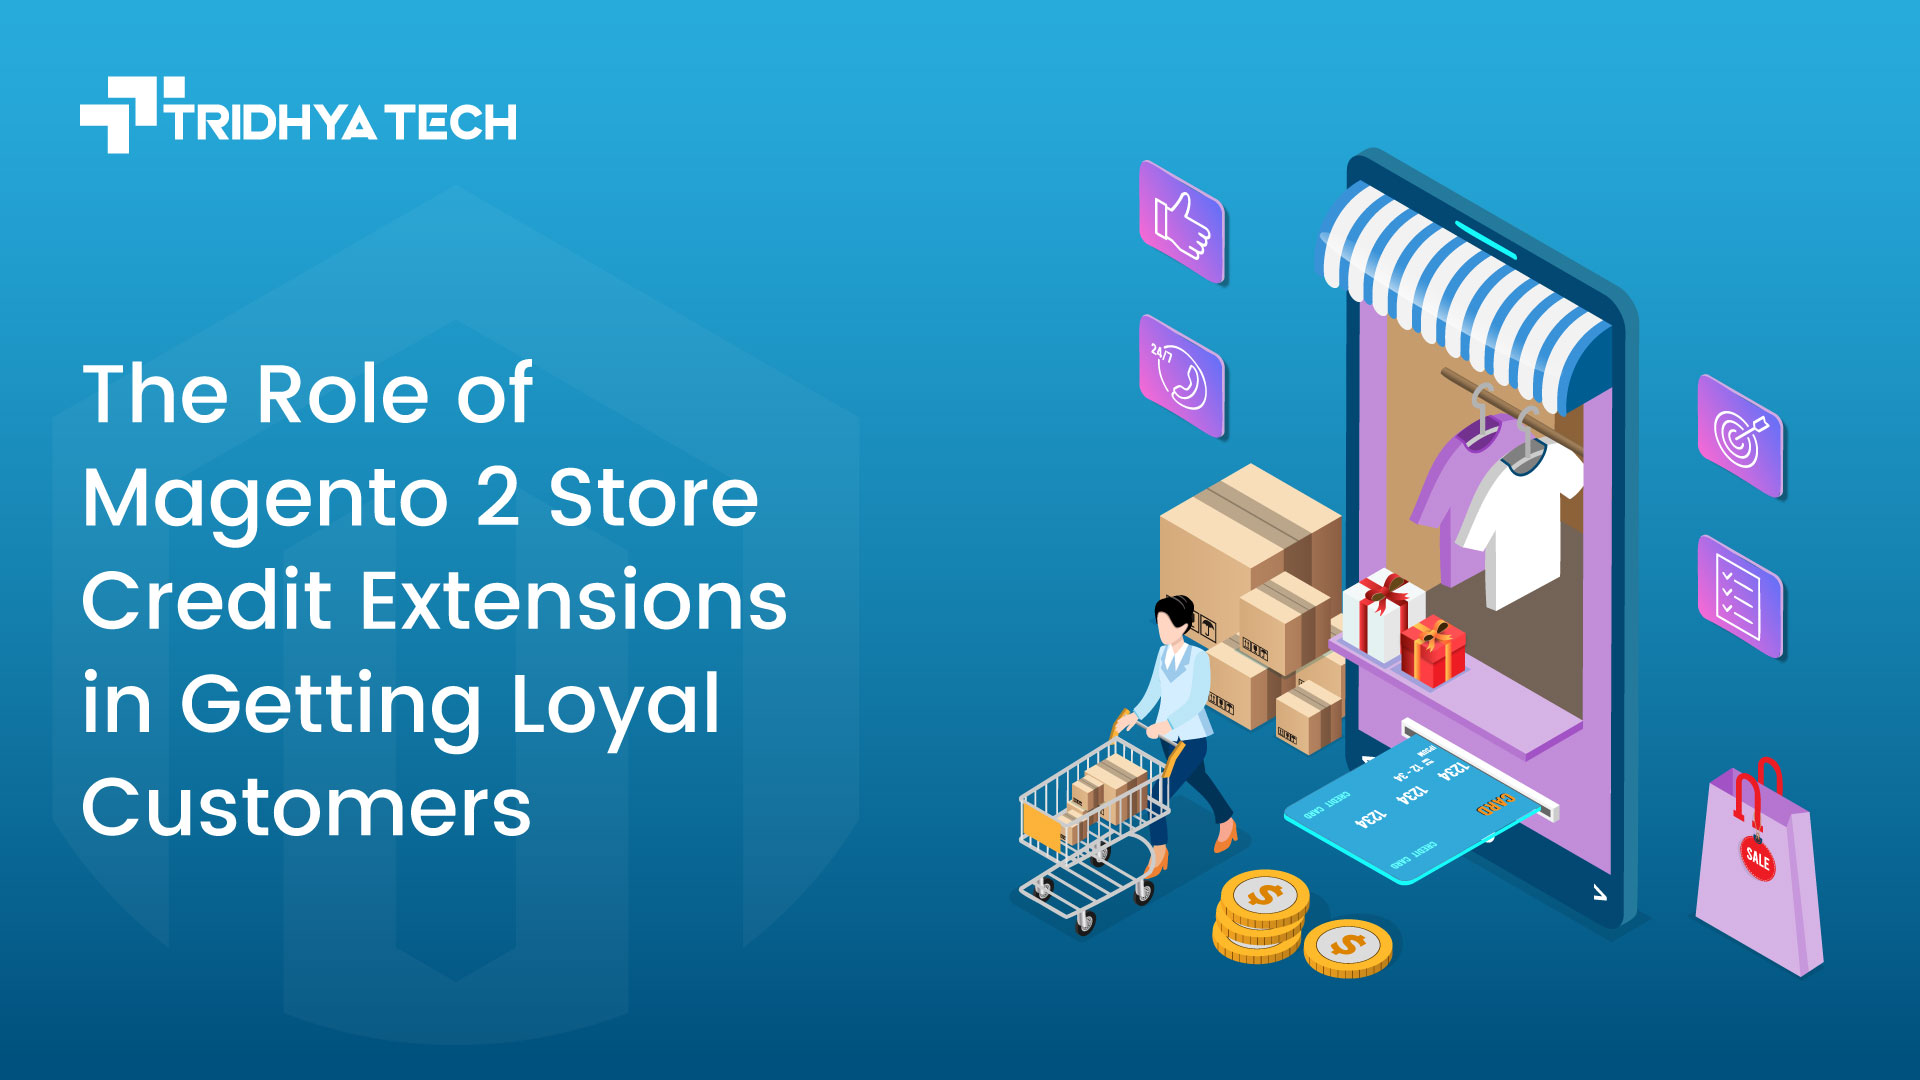 The Role of Magento 2 Store Credit Extensions in Getting Loyal Customers